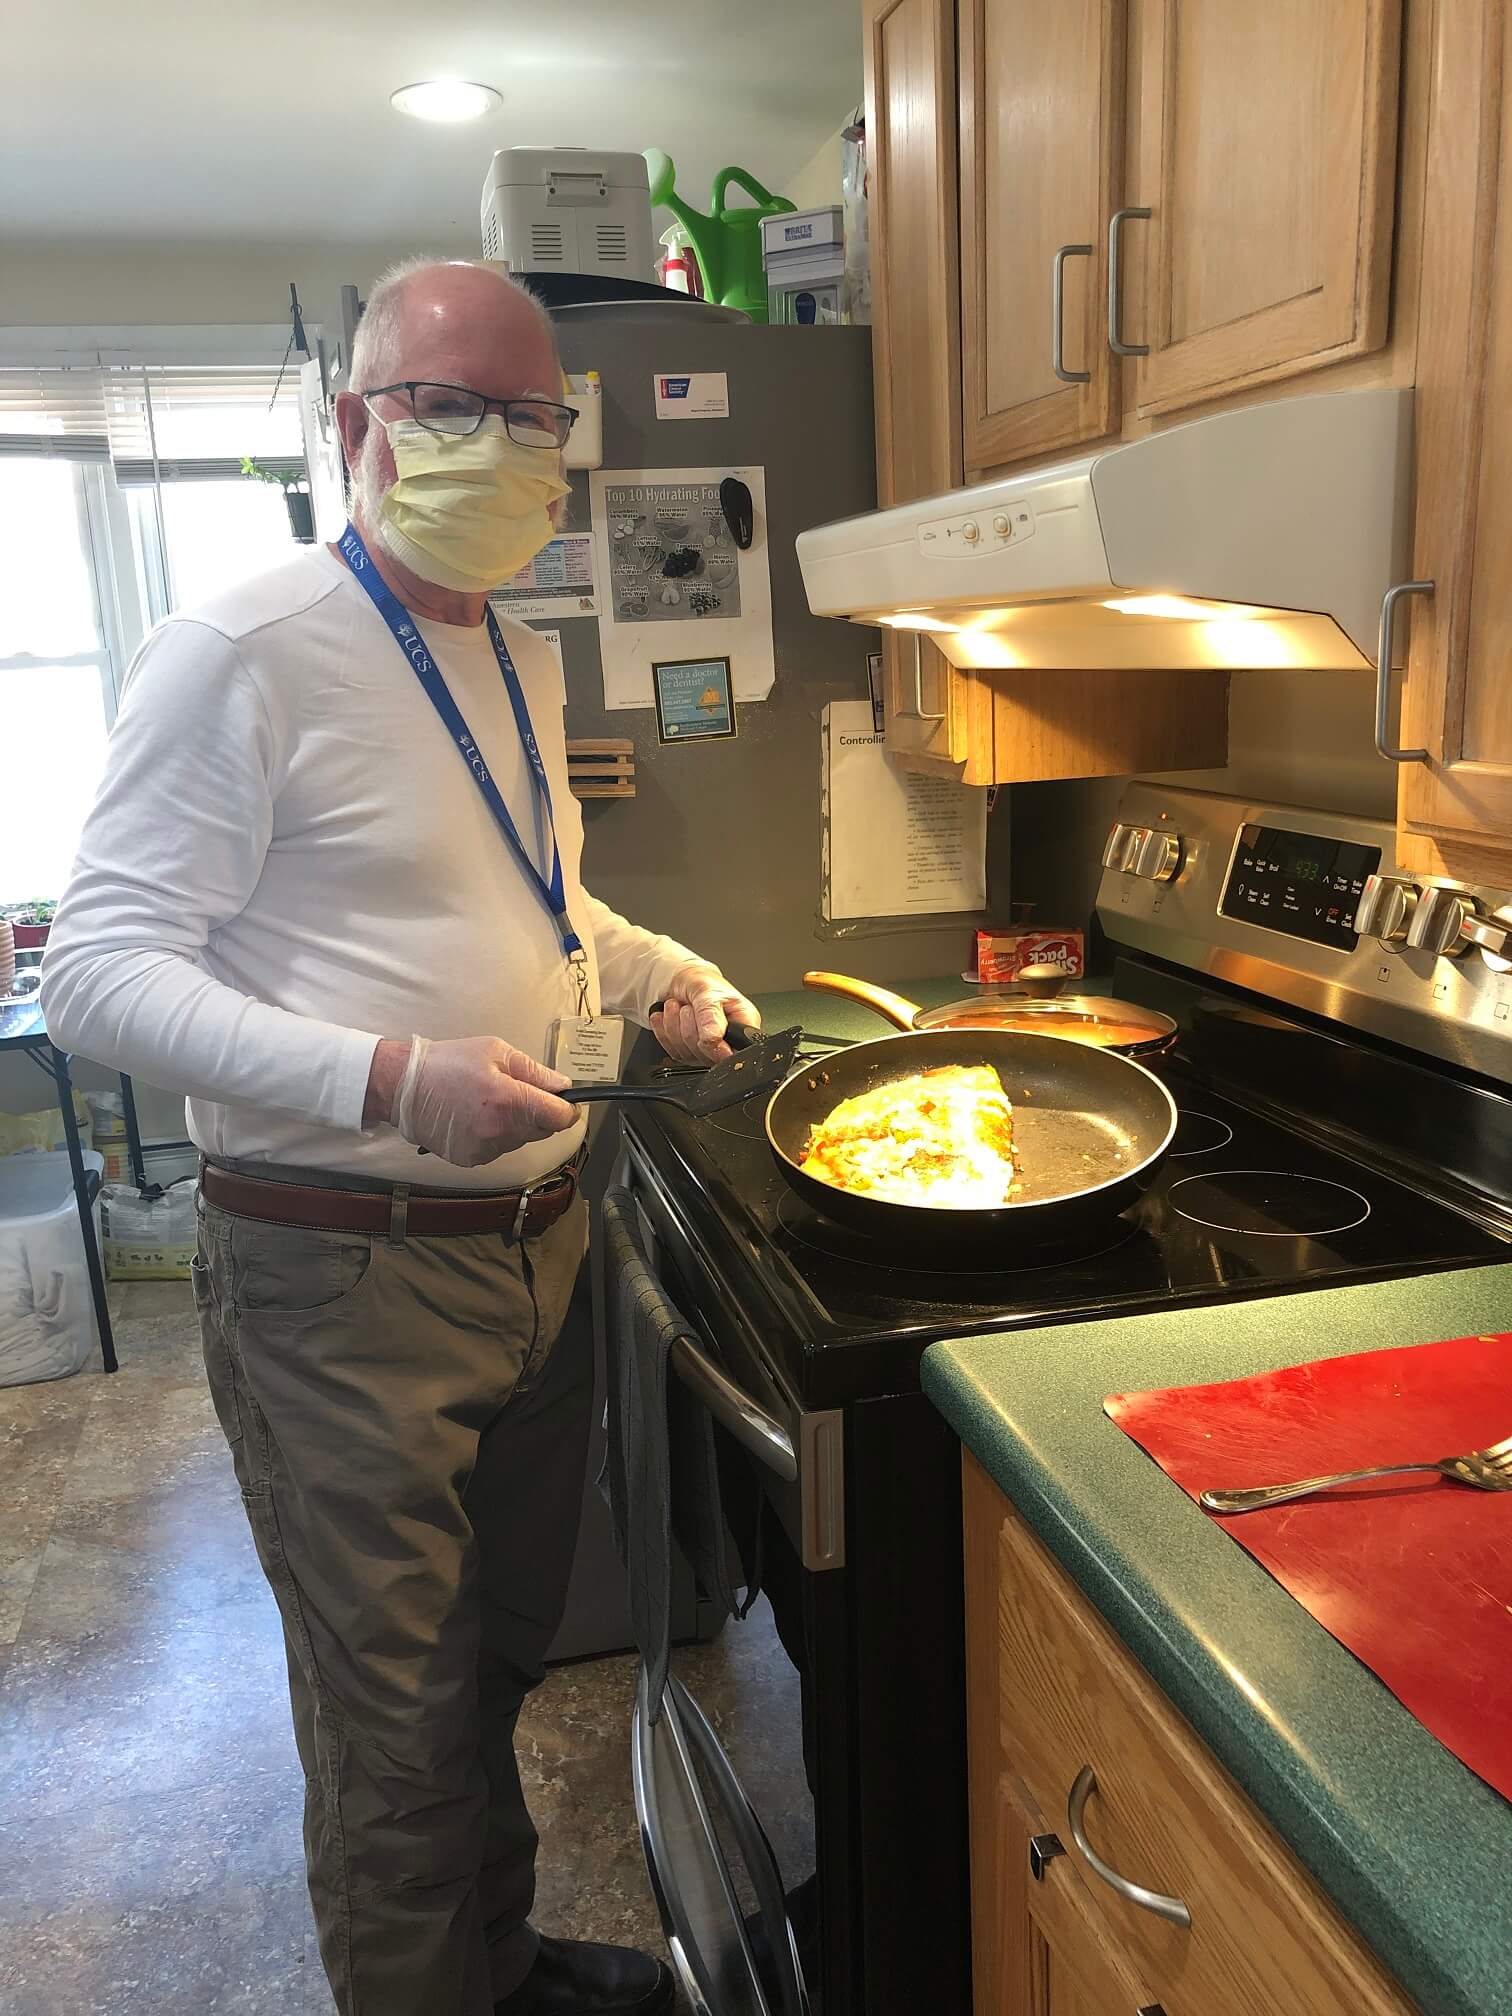 A man wearing a blue lanyard makes on omelet on a black stovetop. He is wearing face mask.